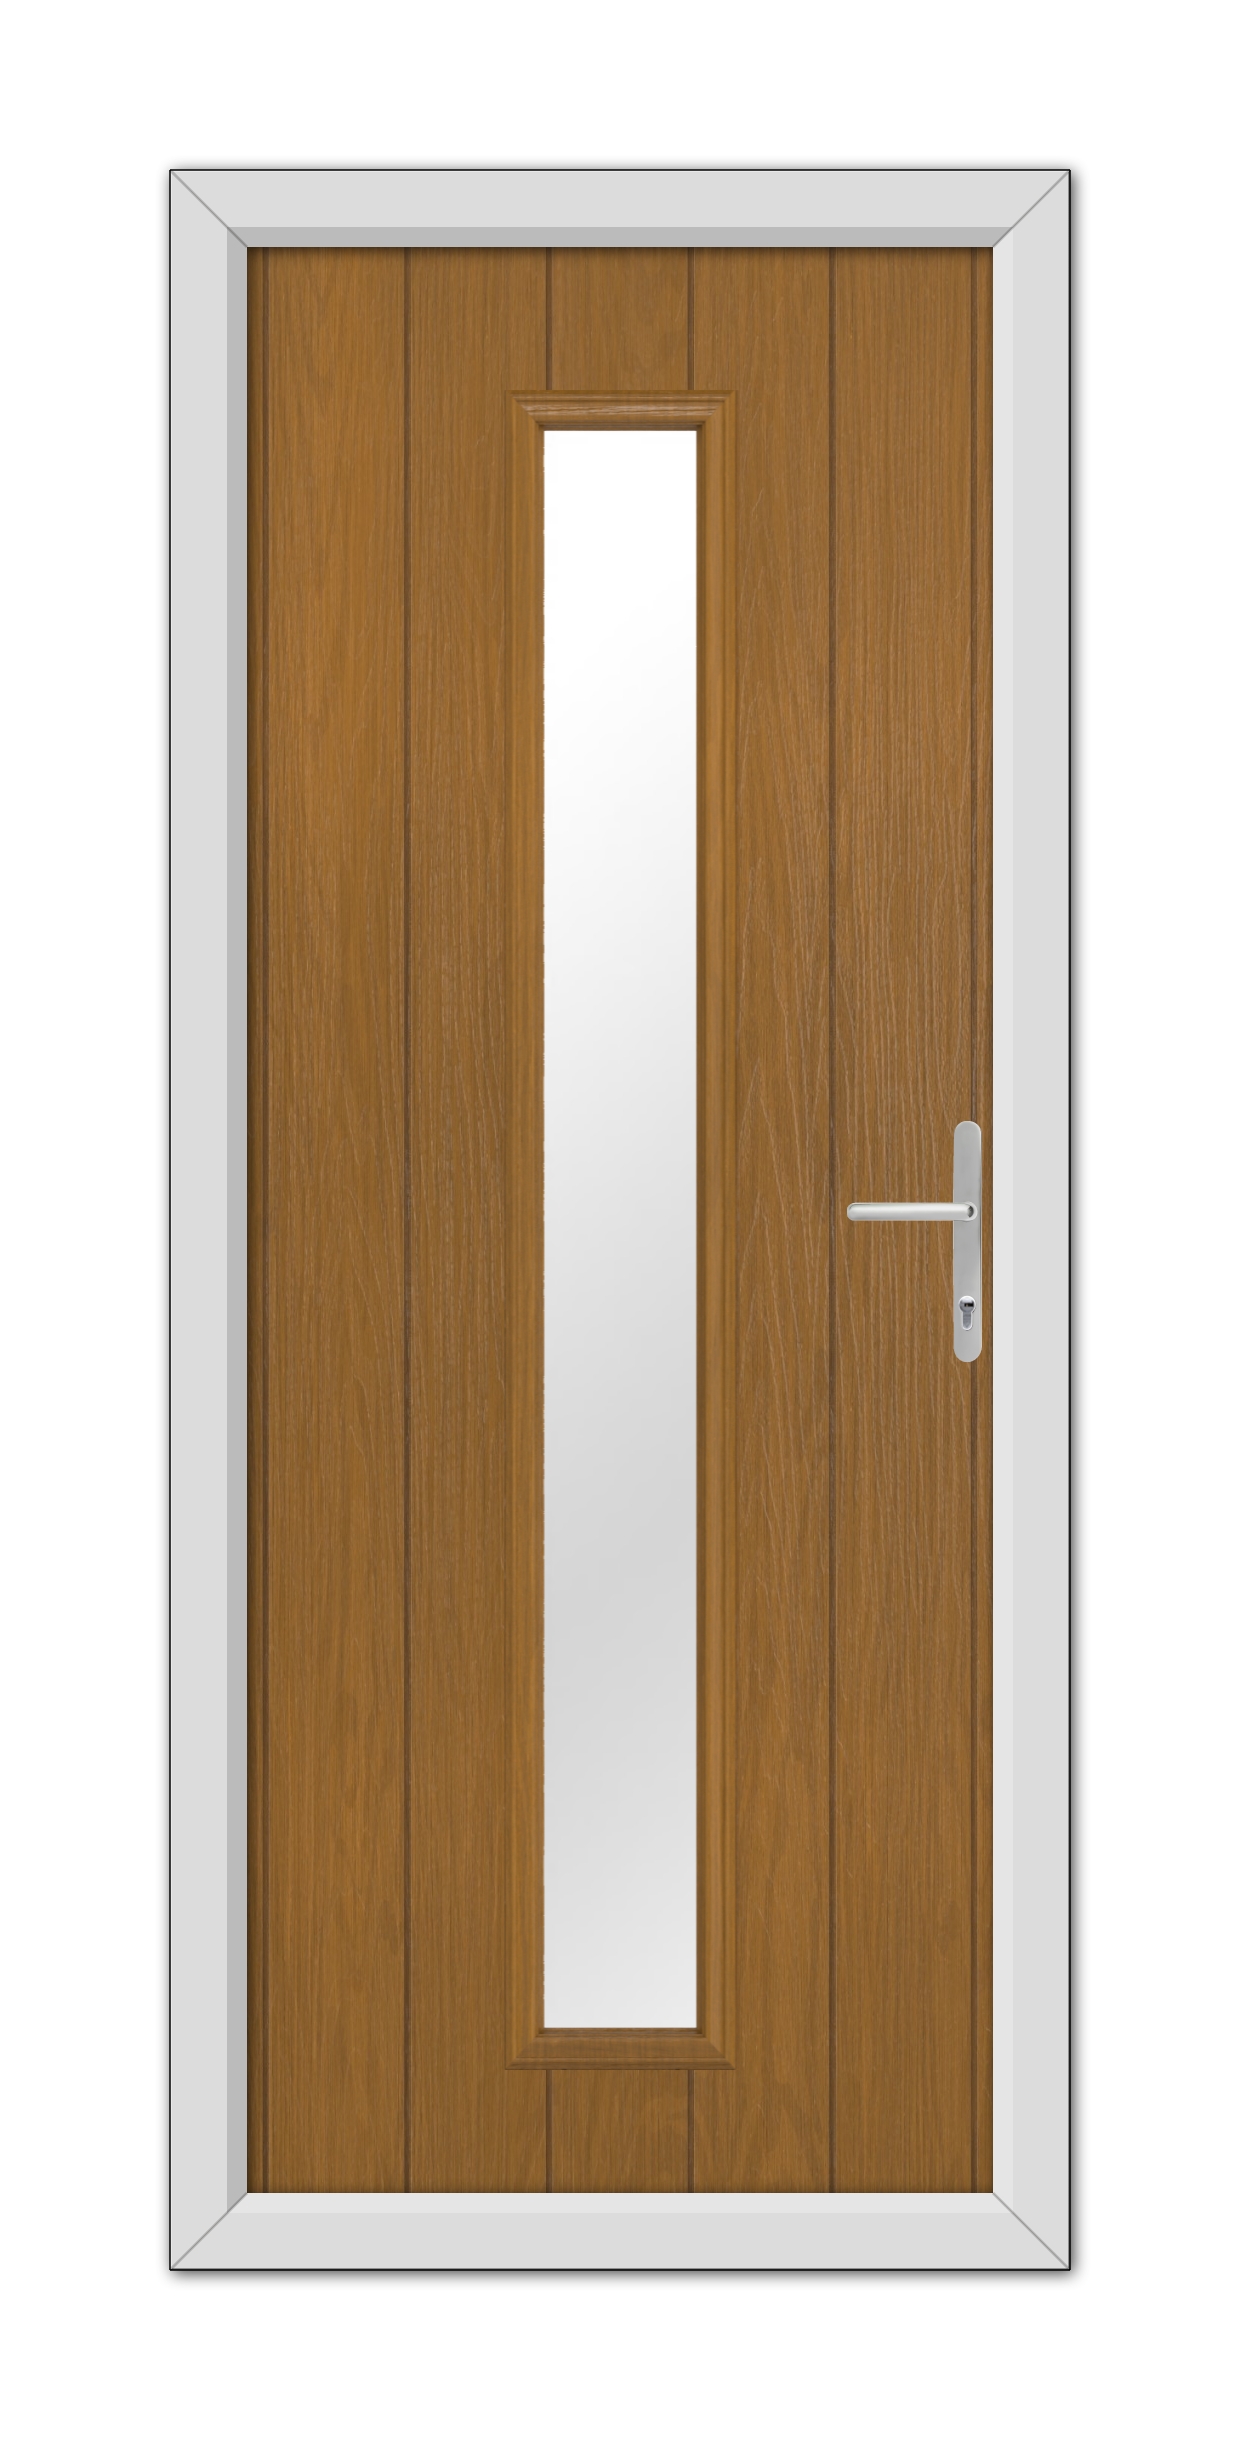 A oak Rutland composite door with a vertical rectangular glass panel and a white door handle, set within a white frame.